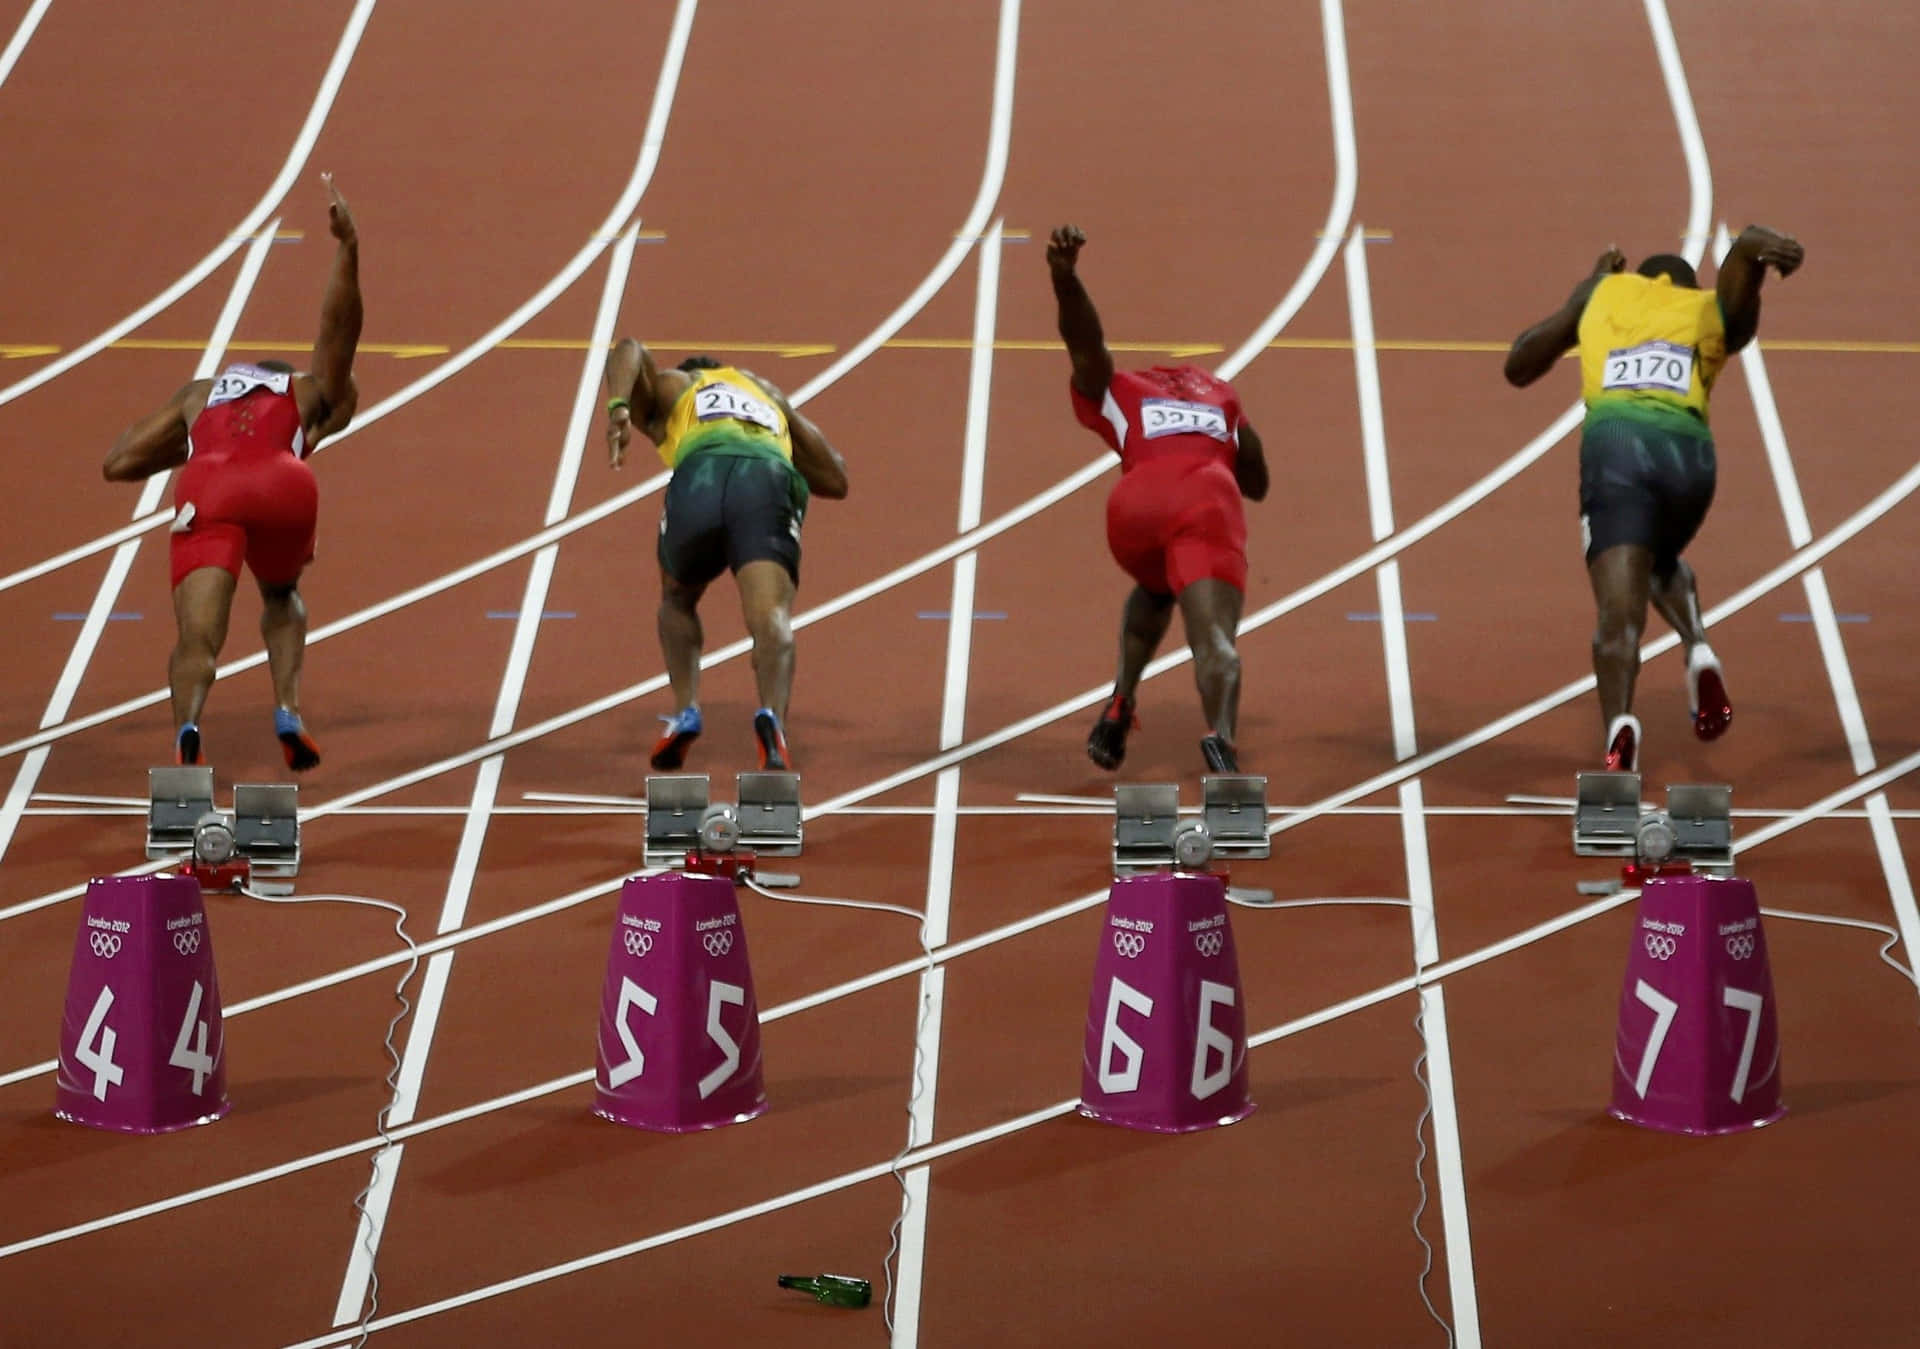 Olympic Athletes Are Competing In The 400m Final